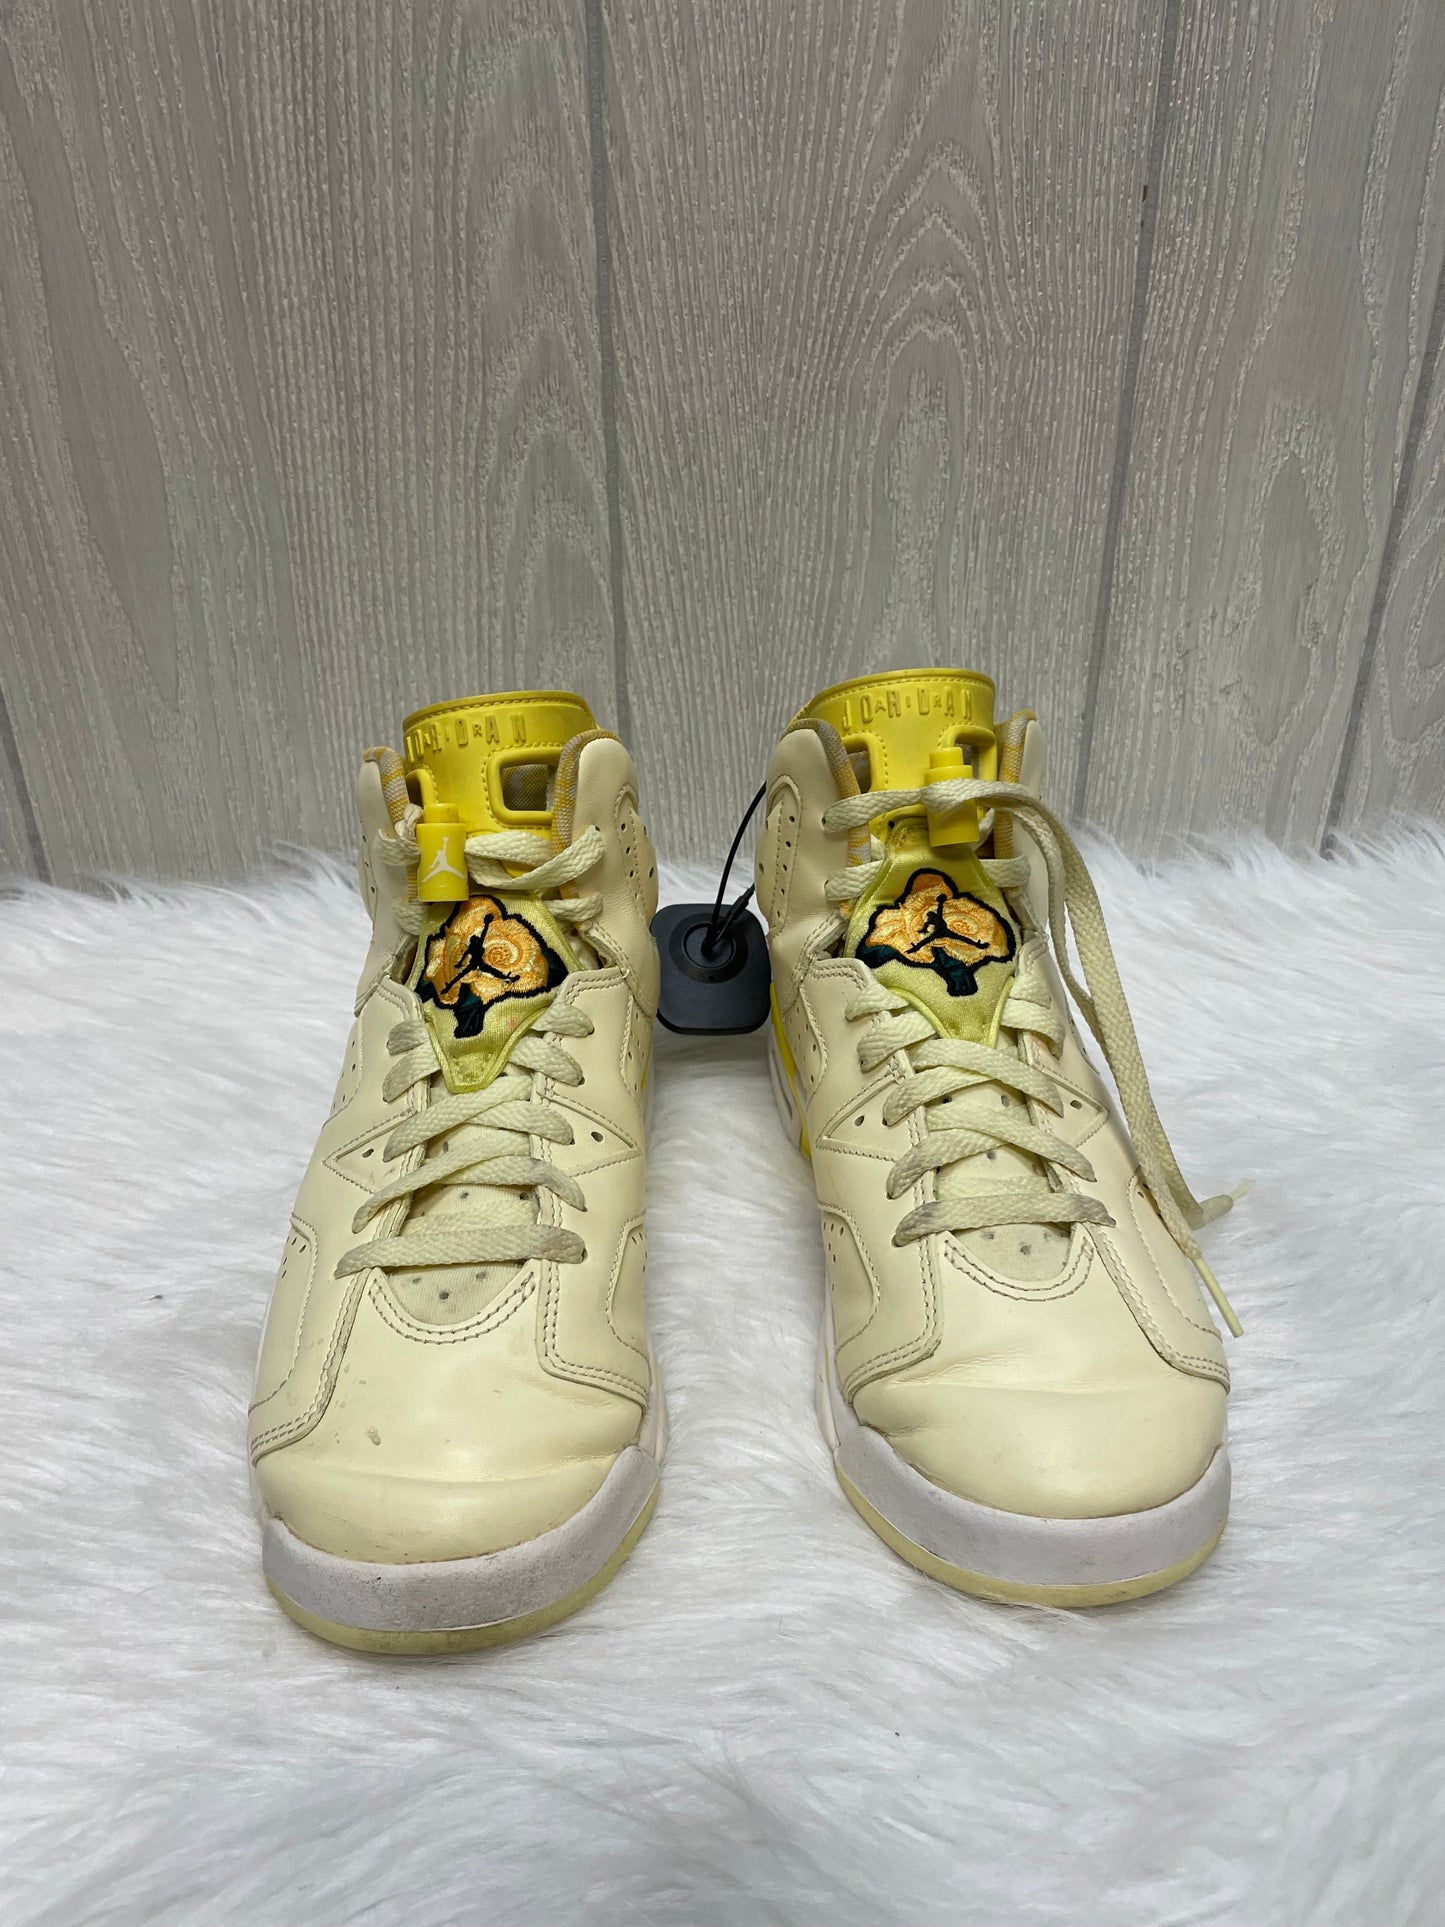 Yellow Shoes Sneakers Nike, Size 8